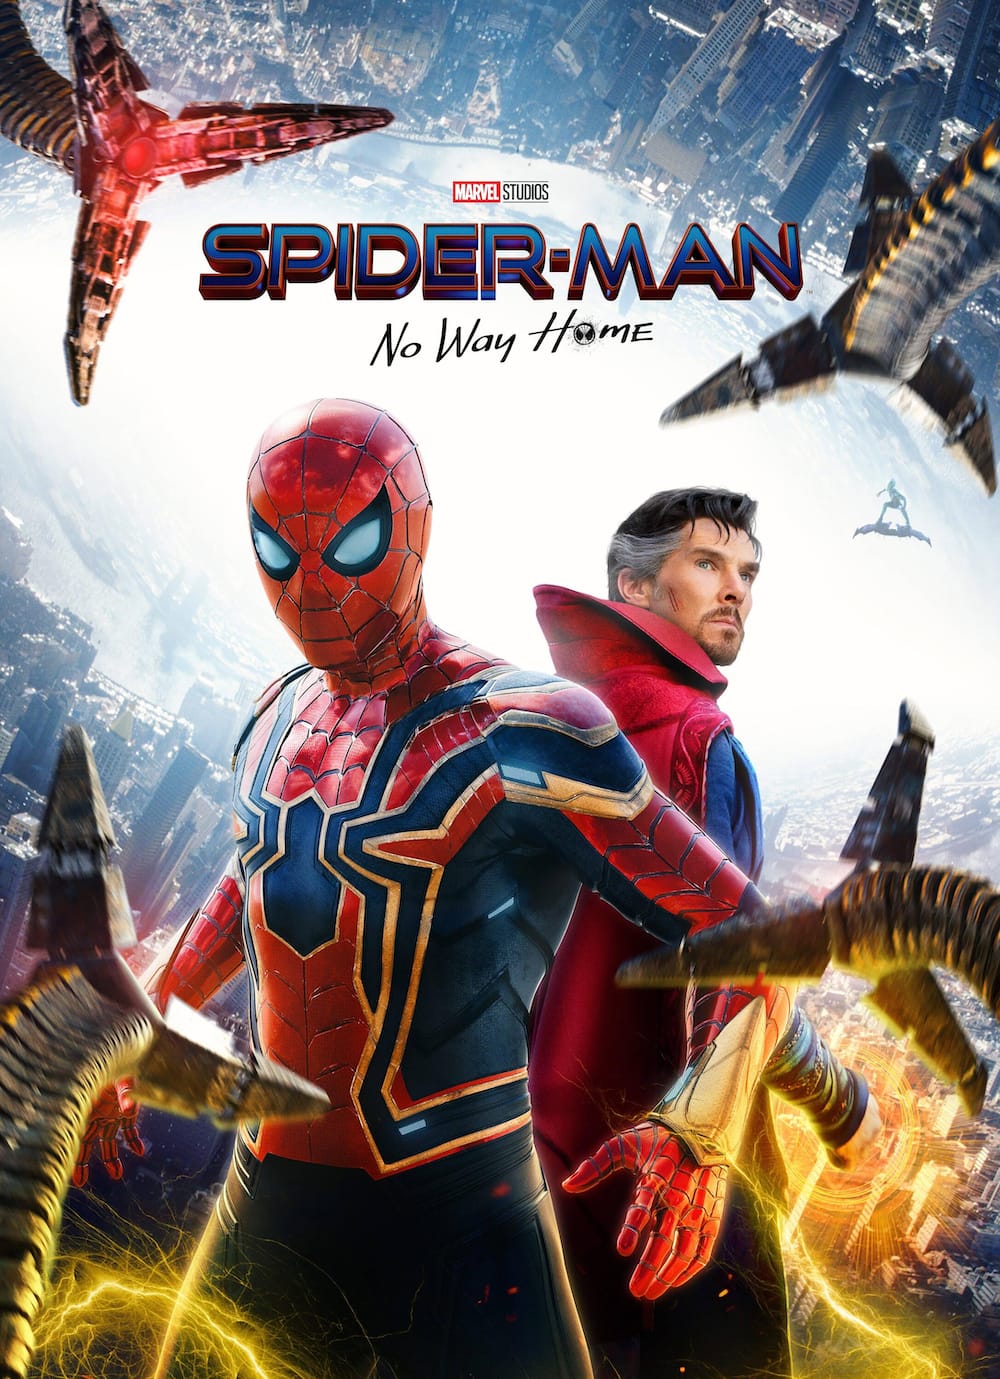 ‘Spider-Man: No Way Home’ Extended Cut to Hit the Theatres on September 2, 2022